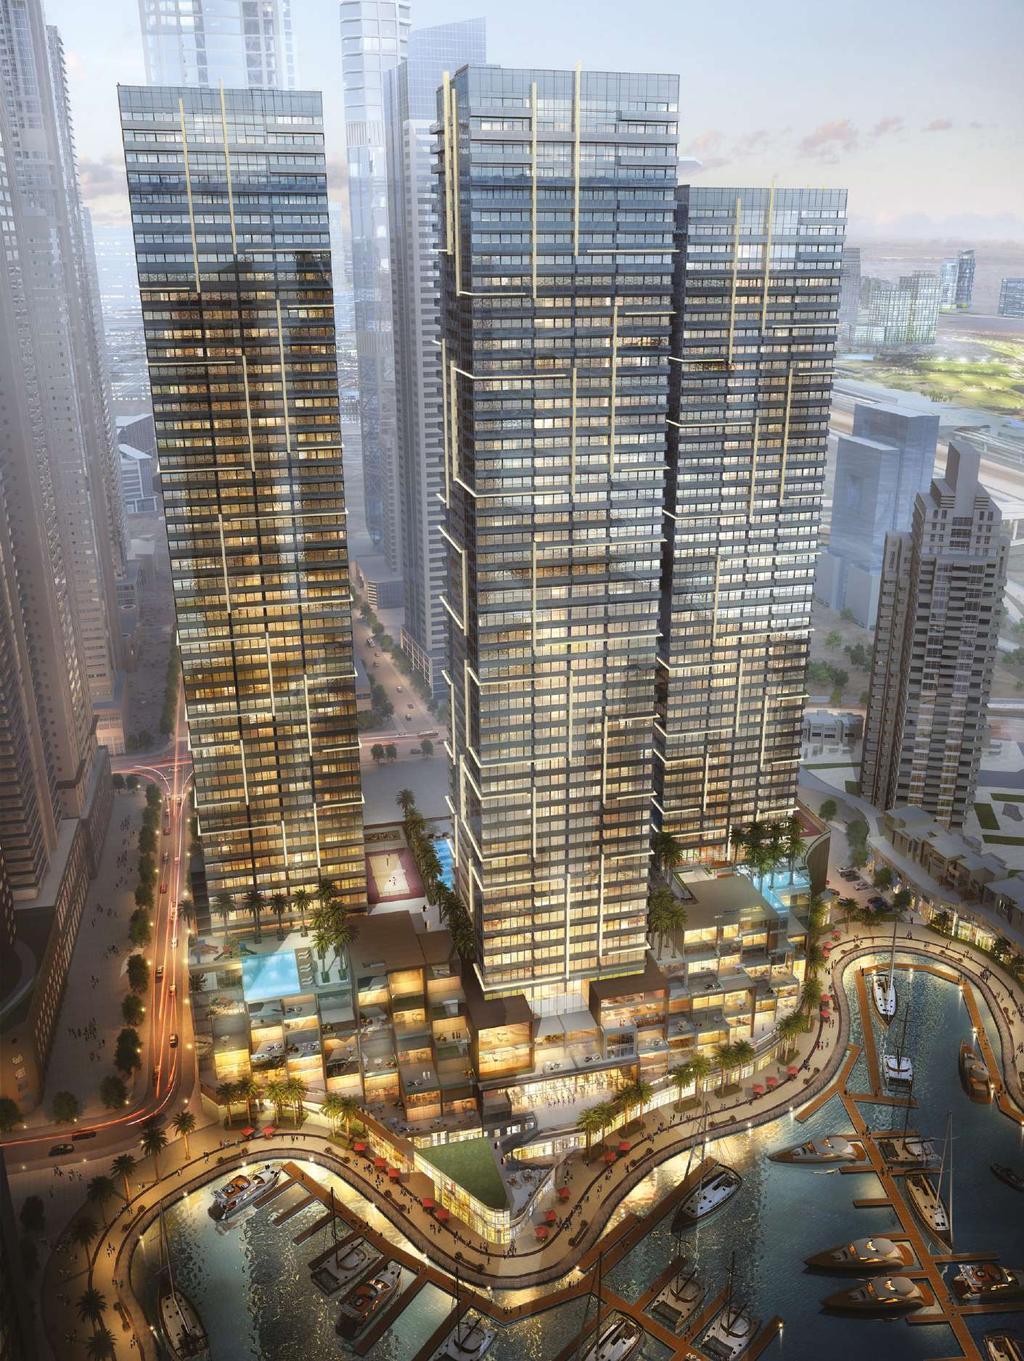 LIFESTYLE LOCATION LUXURY Contents Dynamic Dubai...4 Unrivalled Location...6 Introducing The Residences at Marina Gate... 9 Breathtaking Views...10 The Residences... 13 The Lifestyle.